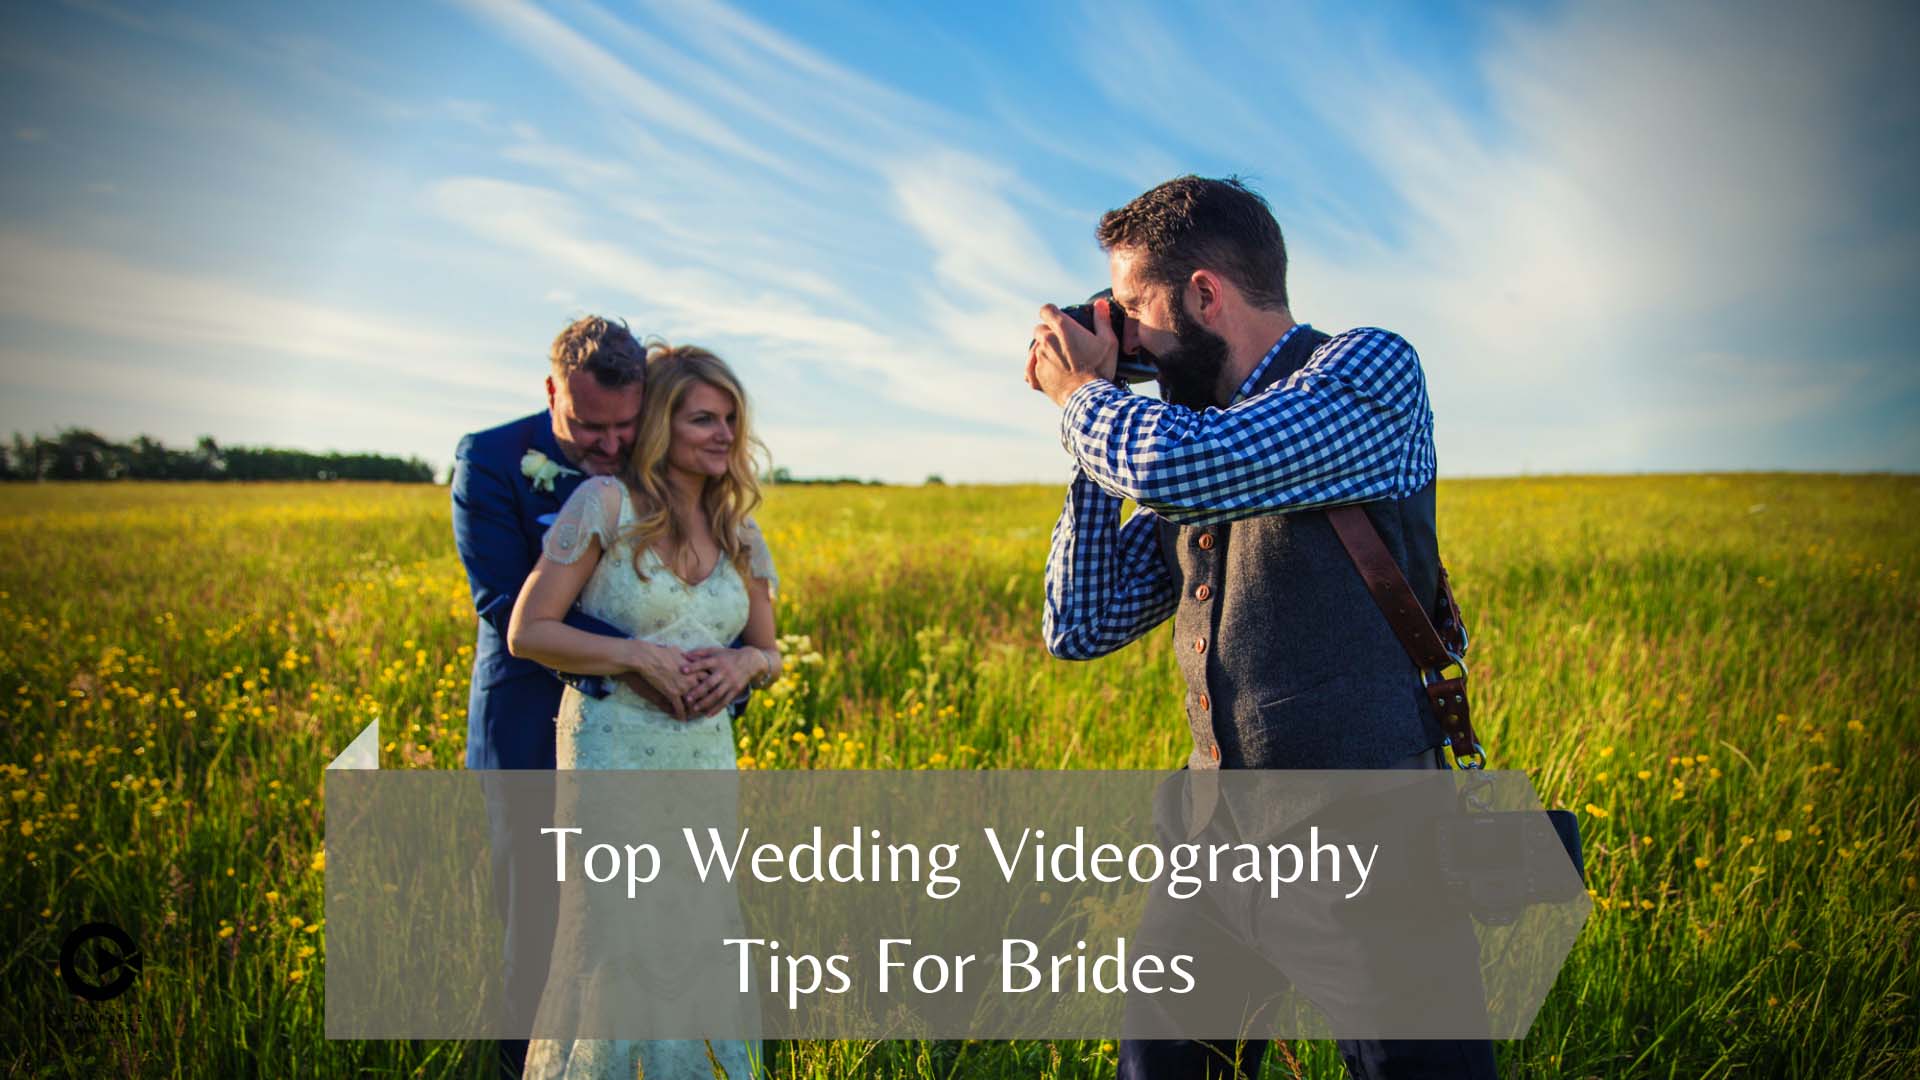 Top Wedding Videography Tips For Brides